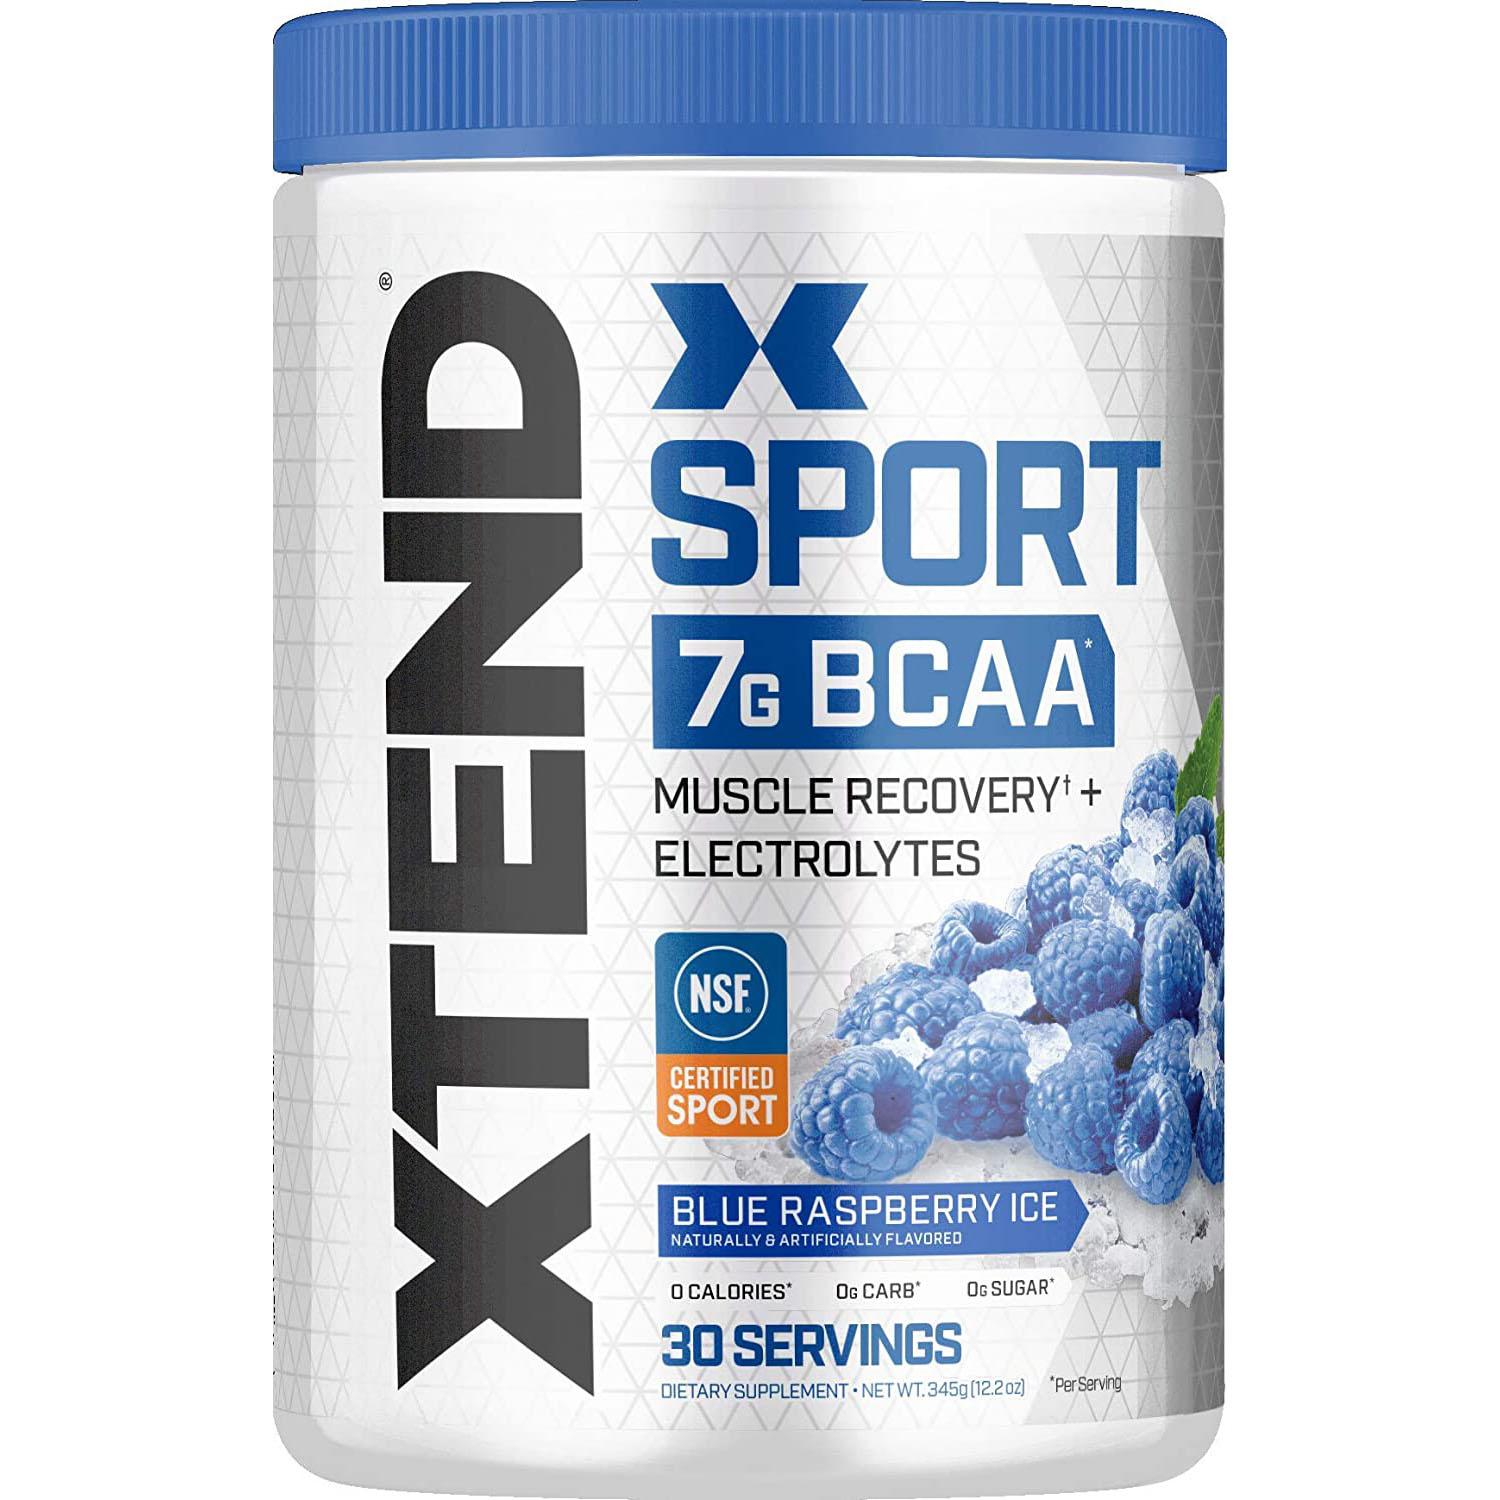 Xtend Sport BCAA Muscle Recovery + Electrolyte Powder for $11.94 Shipped